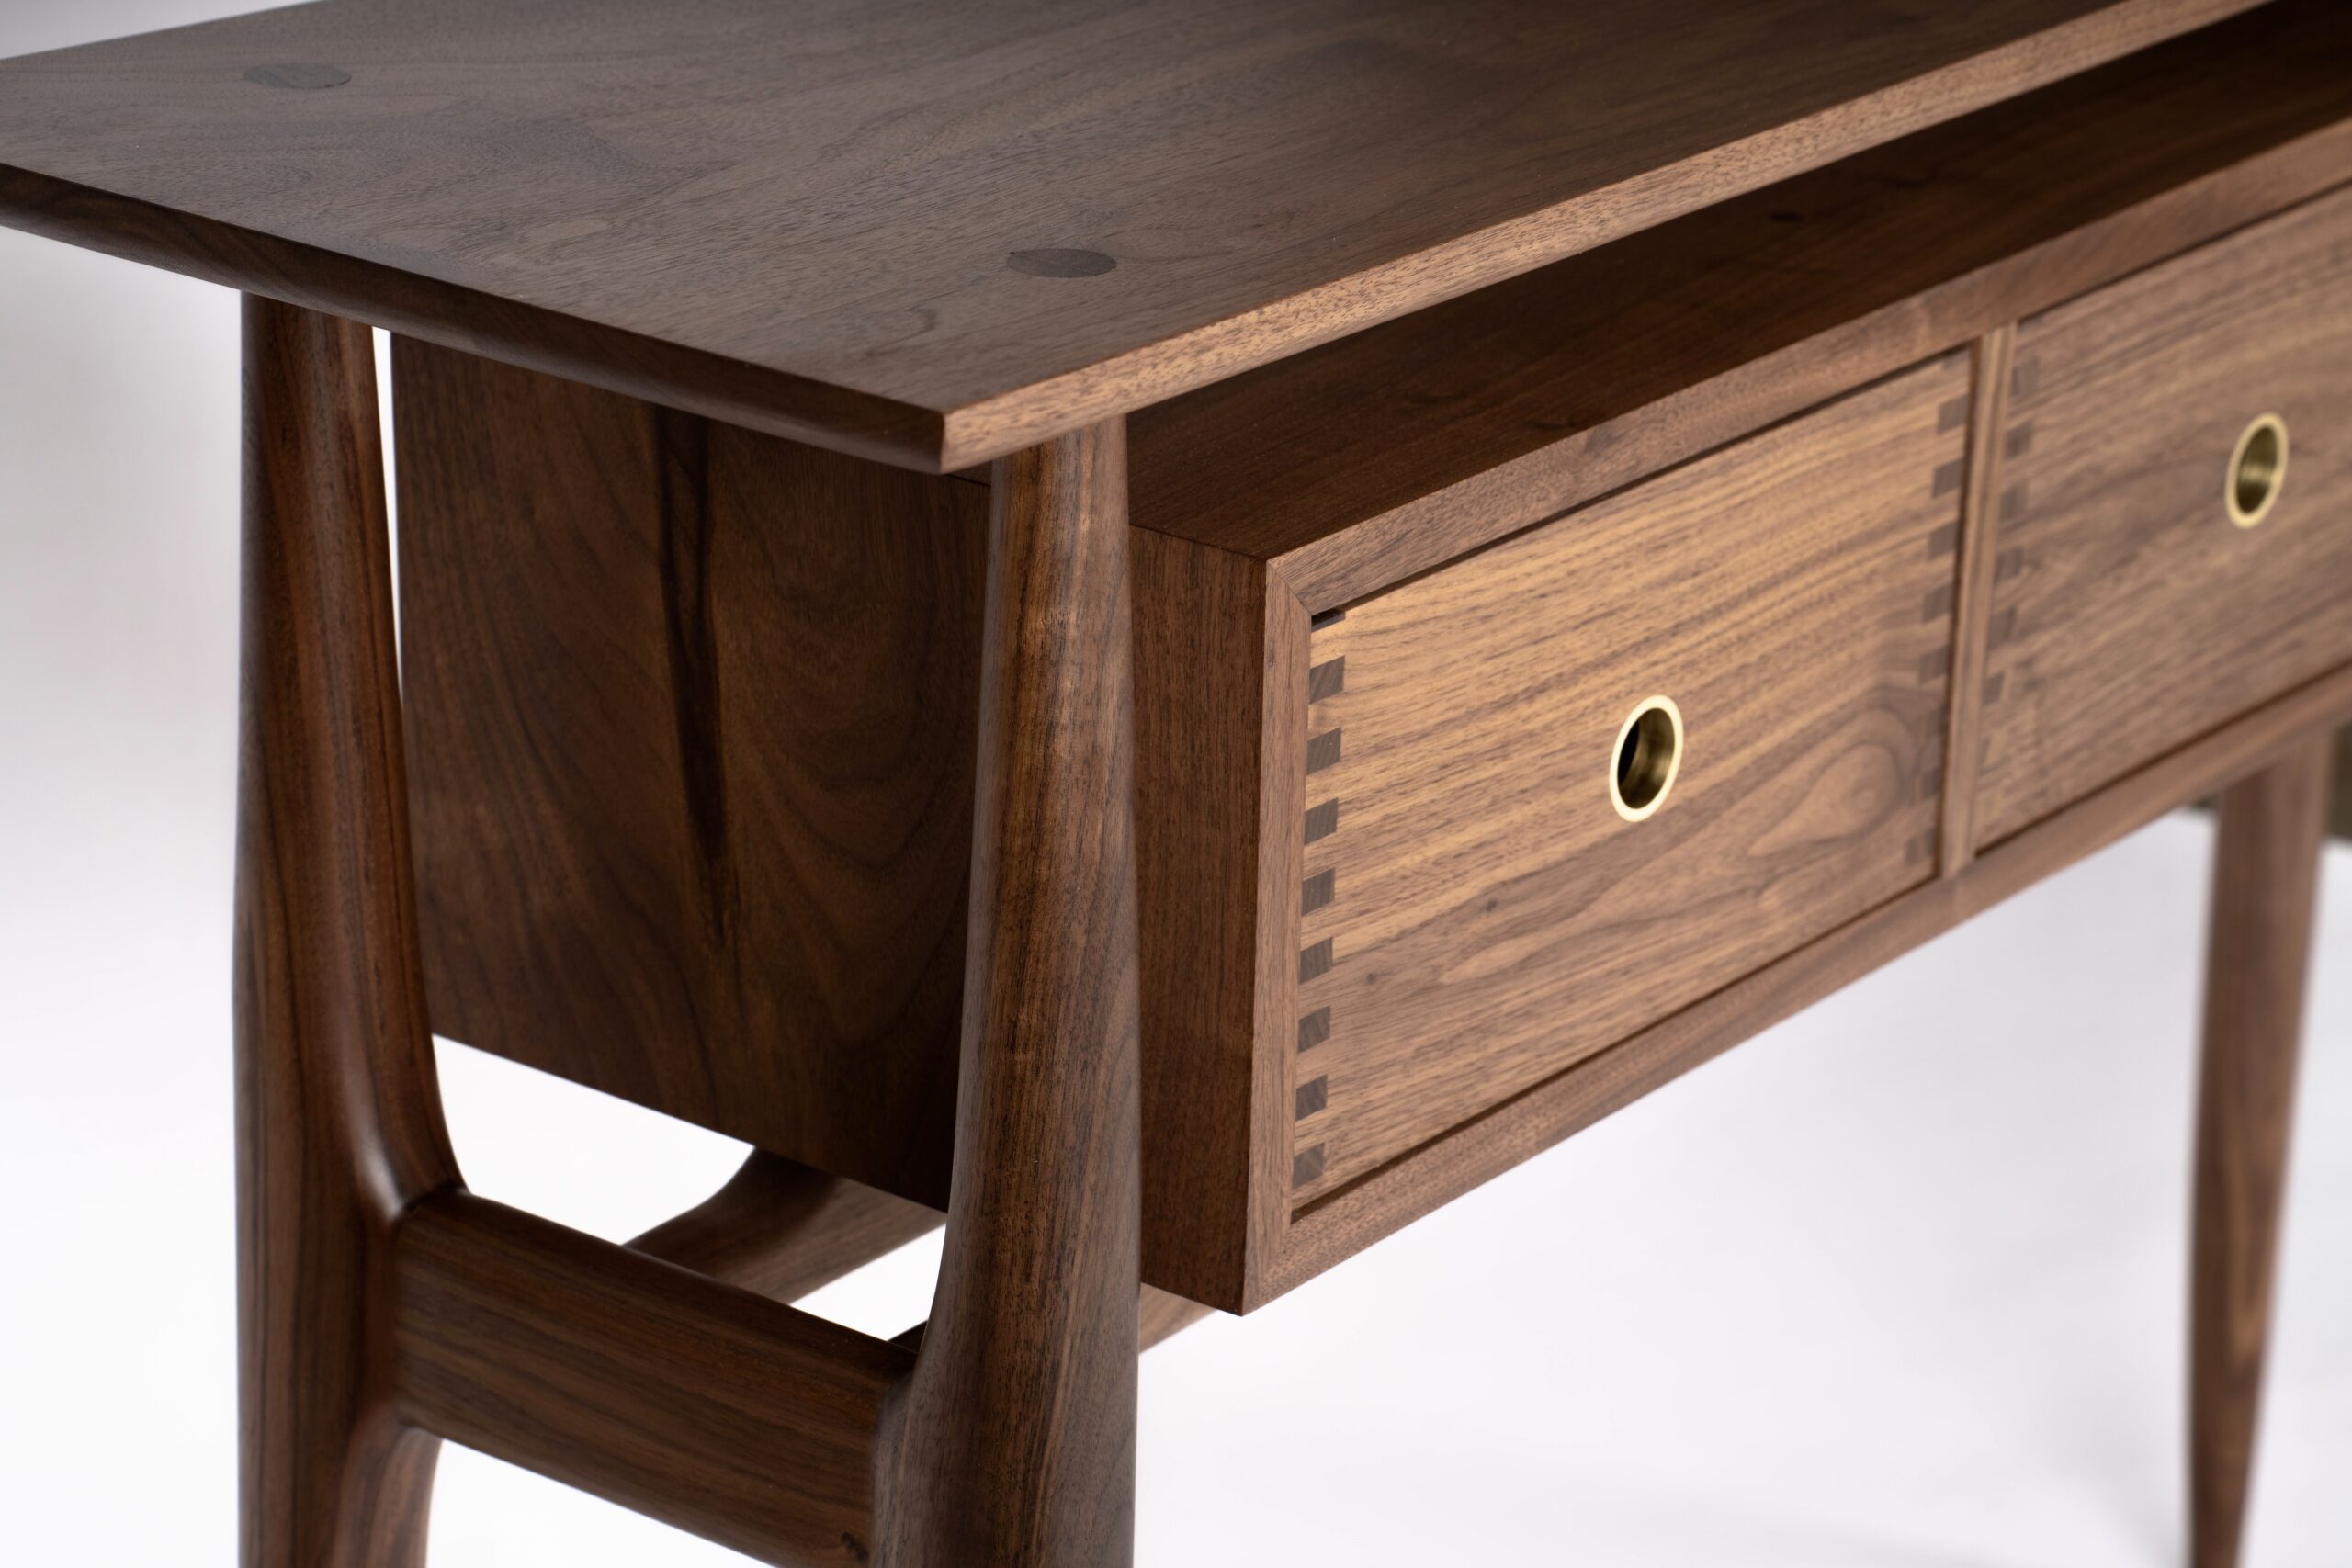 A walnut entry table with round tapered legs and a box with three drawers suspended in a way it appears to float. The pulls are circular cutouts with inlaid brass.